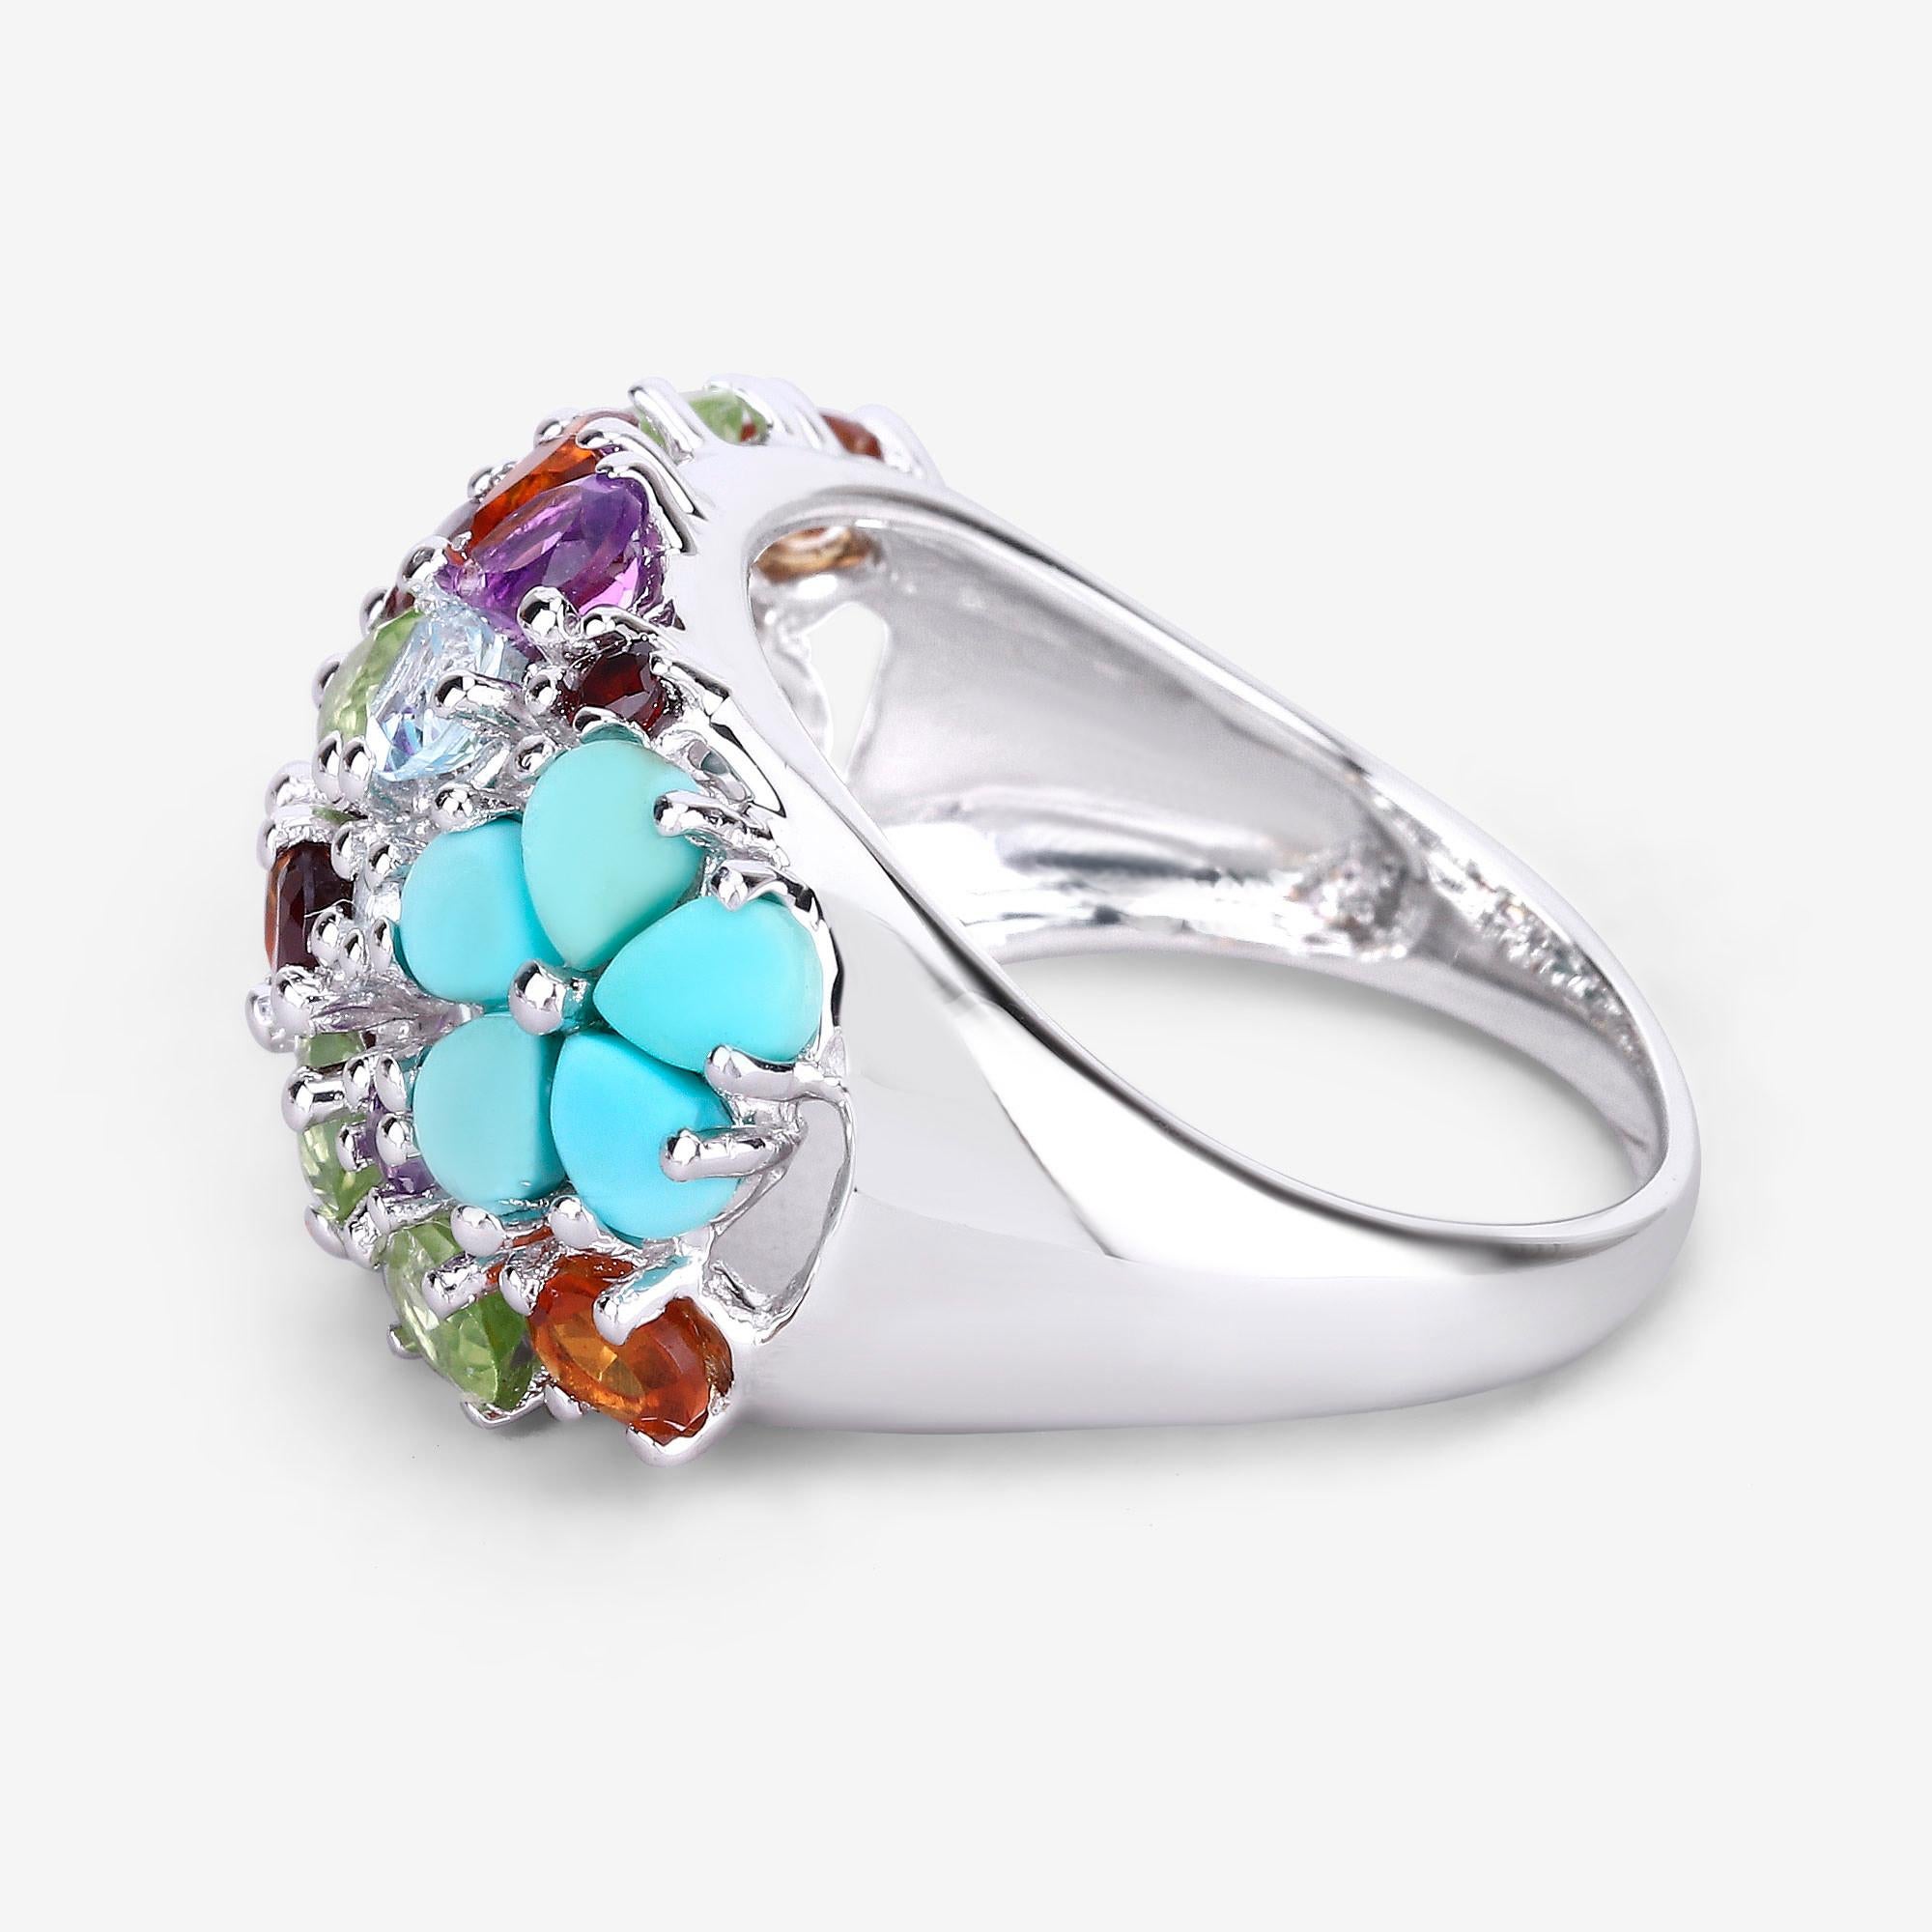 Multicolor Gemstones Cluster Flower Ring 4.06 Carats In Excellent Condition For Sale In Laguna Niguel, CA